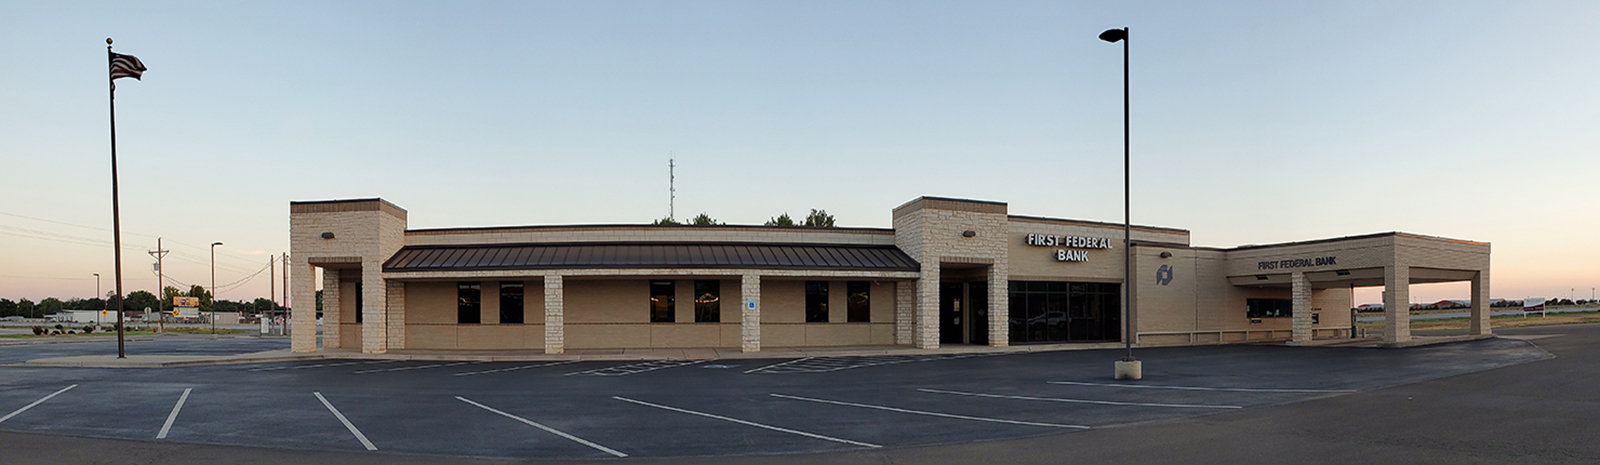 picture of First Federal Bank and parking lot